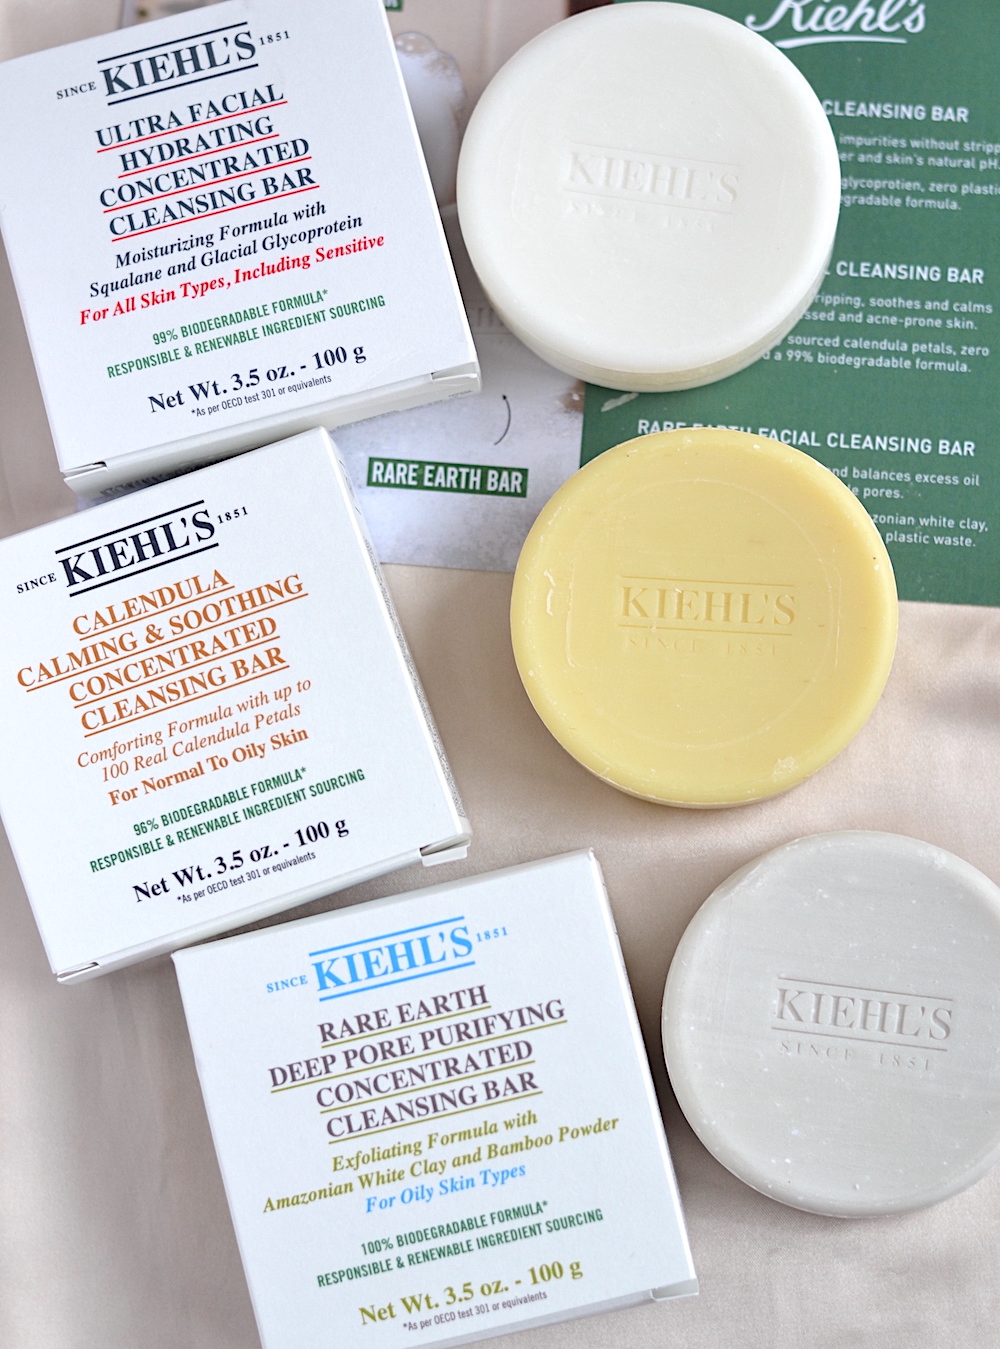 Kiehl's Concentrated Facial Cleansing Bars are the perfect way to find a gentle cleanser to pamper your skin, while also staying eco-friendly!